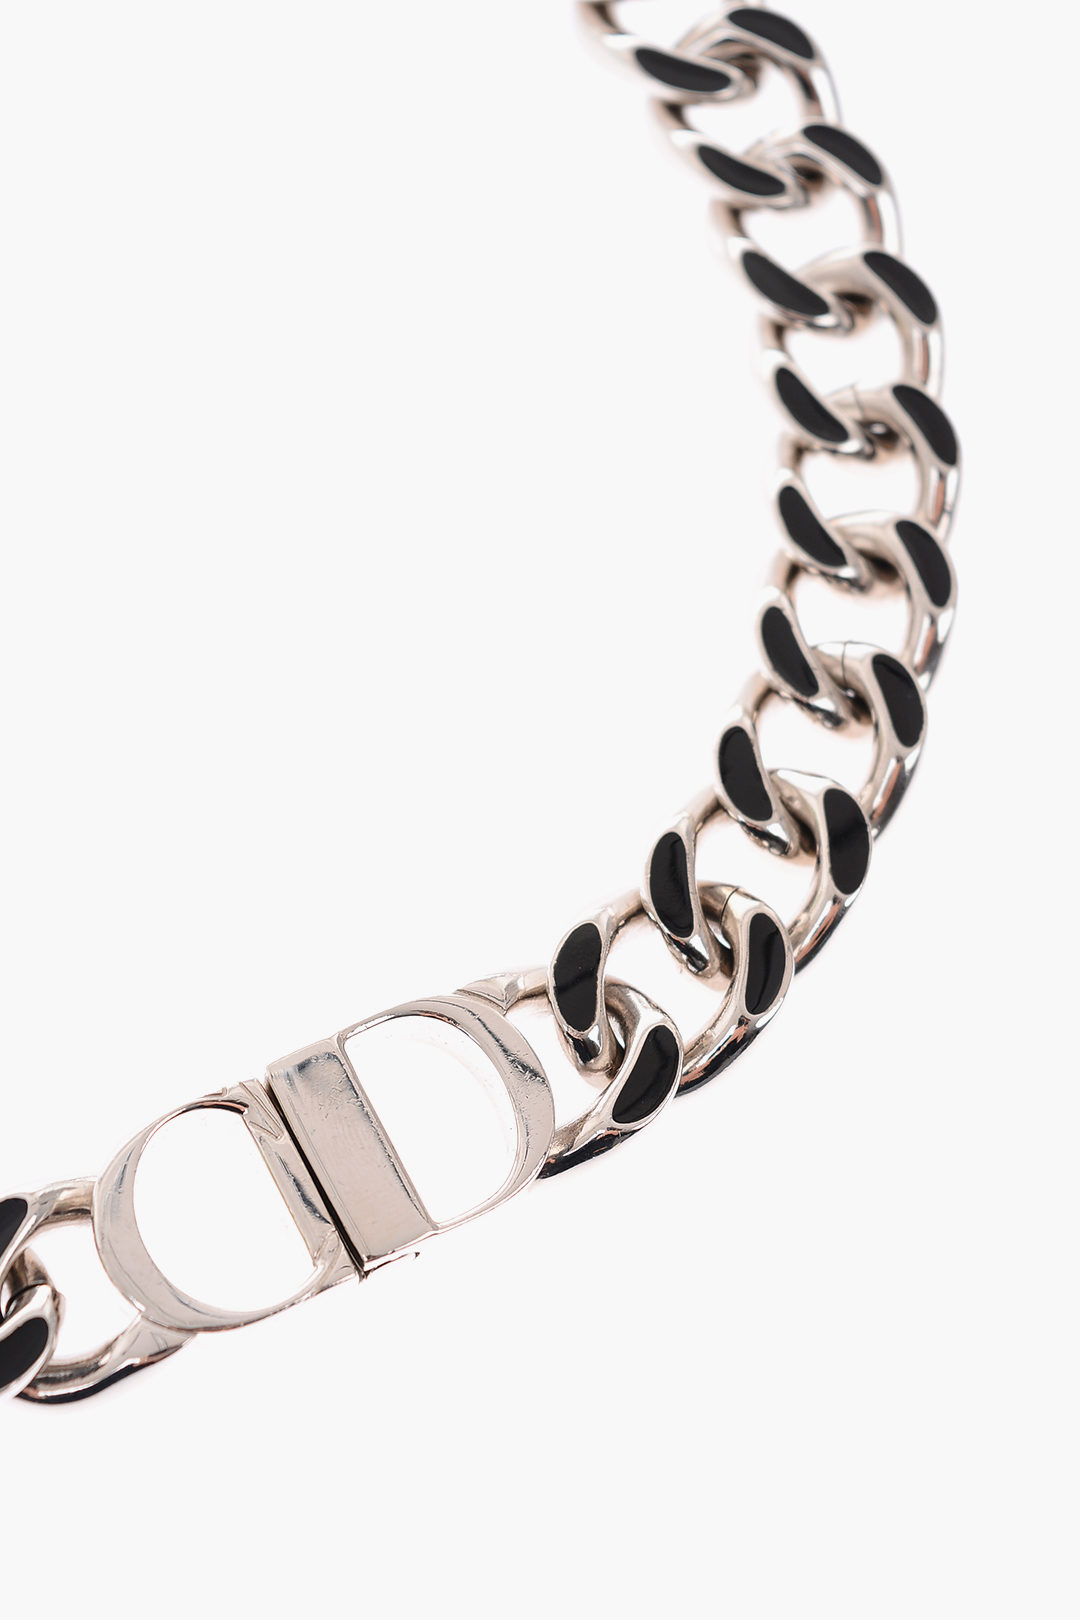 Dior Men's CD Icon Chain Link Necklace